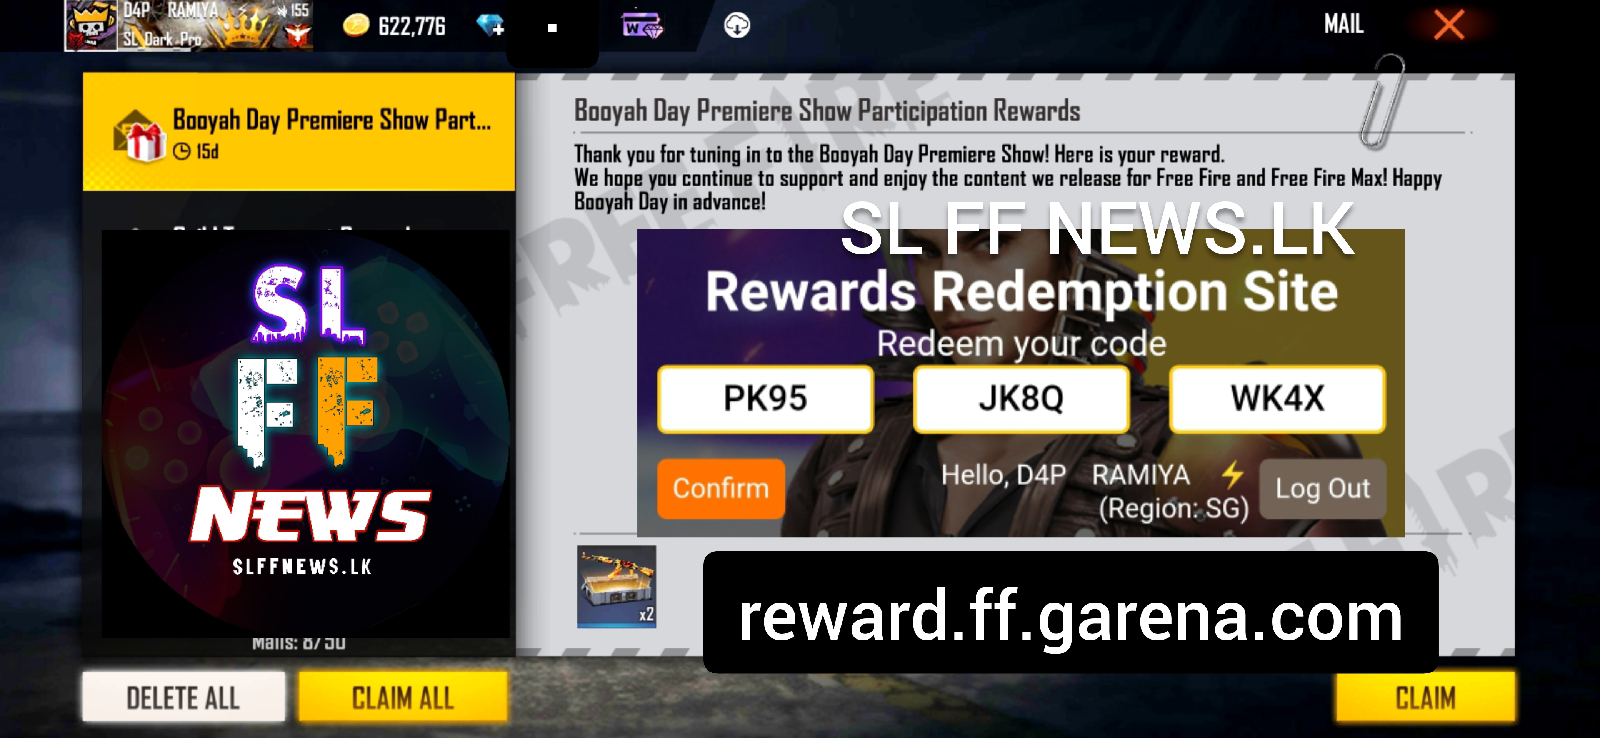 How to use Free Fire redeem codes on official rewards redemption site in  April 2022